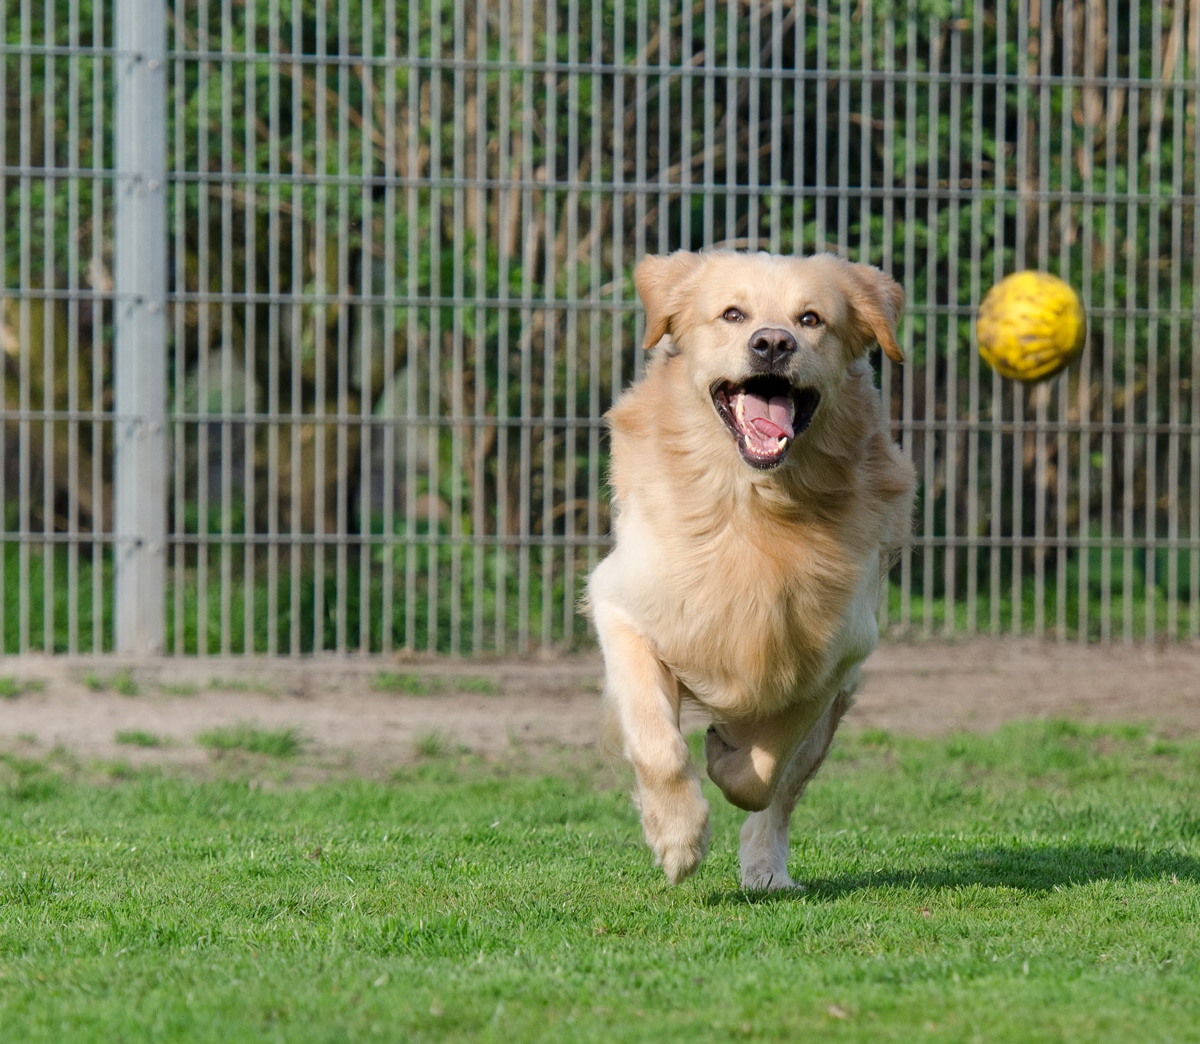 A dog playfully running after a ball whille out in its garden